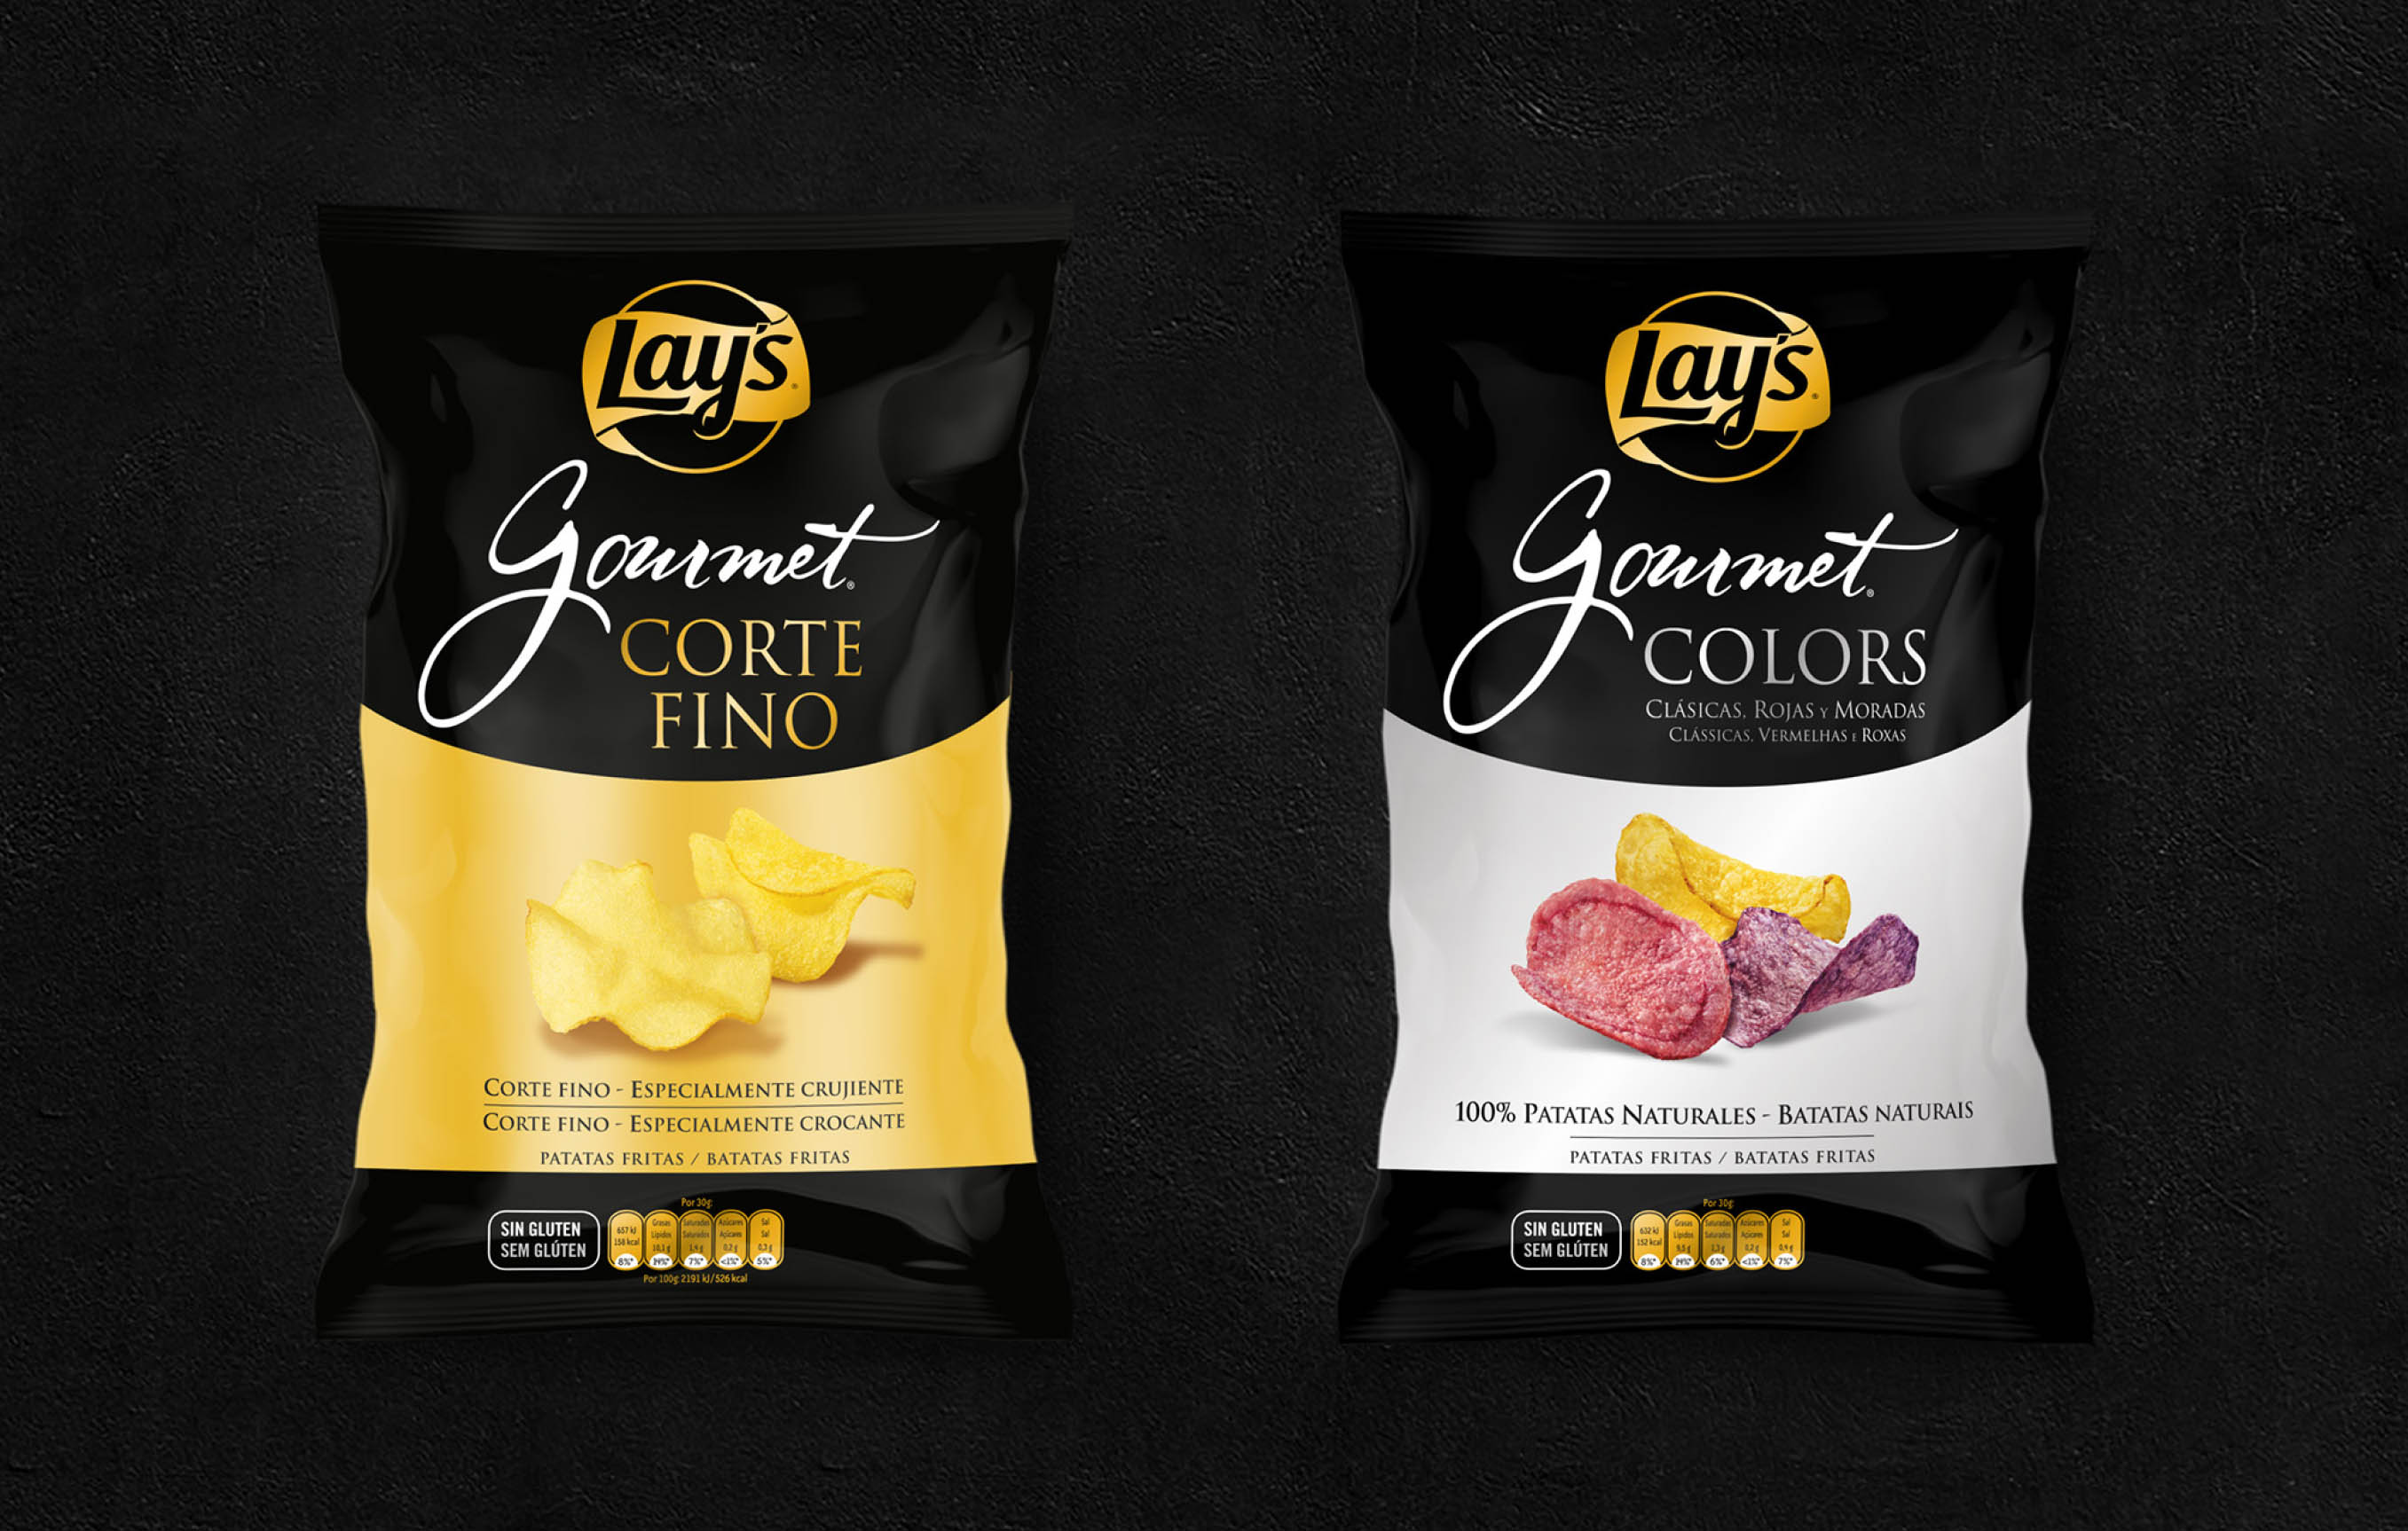 Lay’s is, with more than 80 years of experience, one of the world’s most recognized snack brands. The constant expansion of its product range and its high quality make it the respected and successful global brand that it is today.
